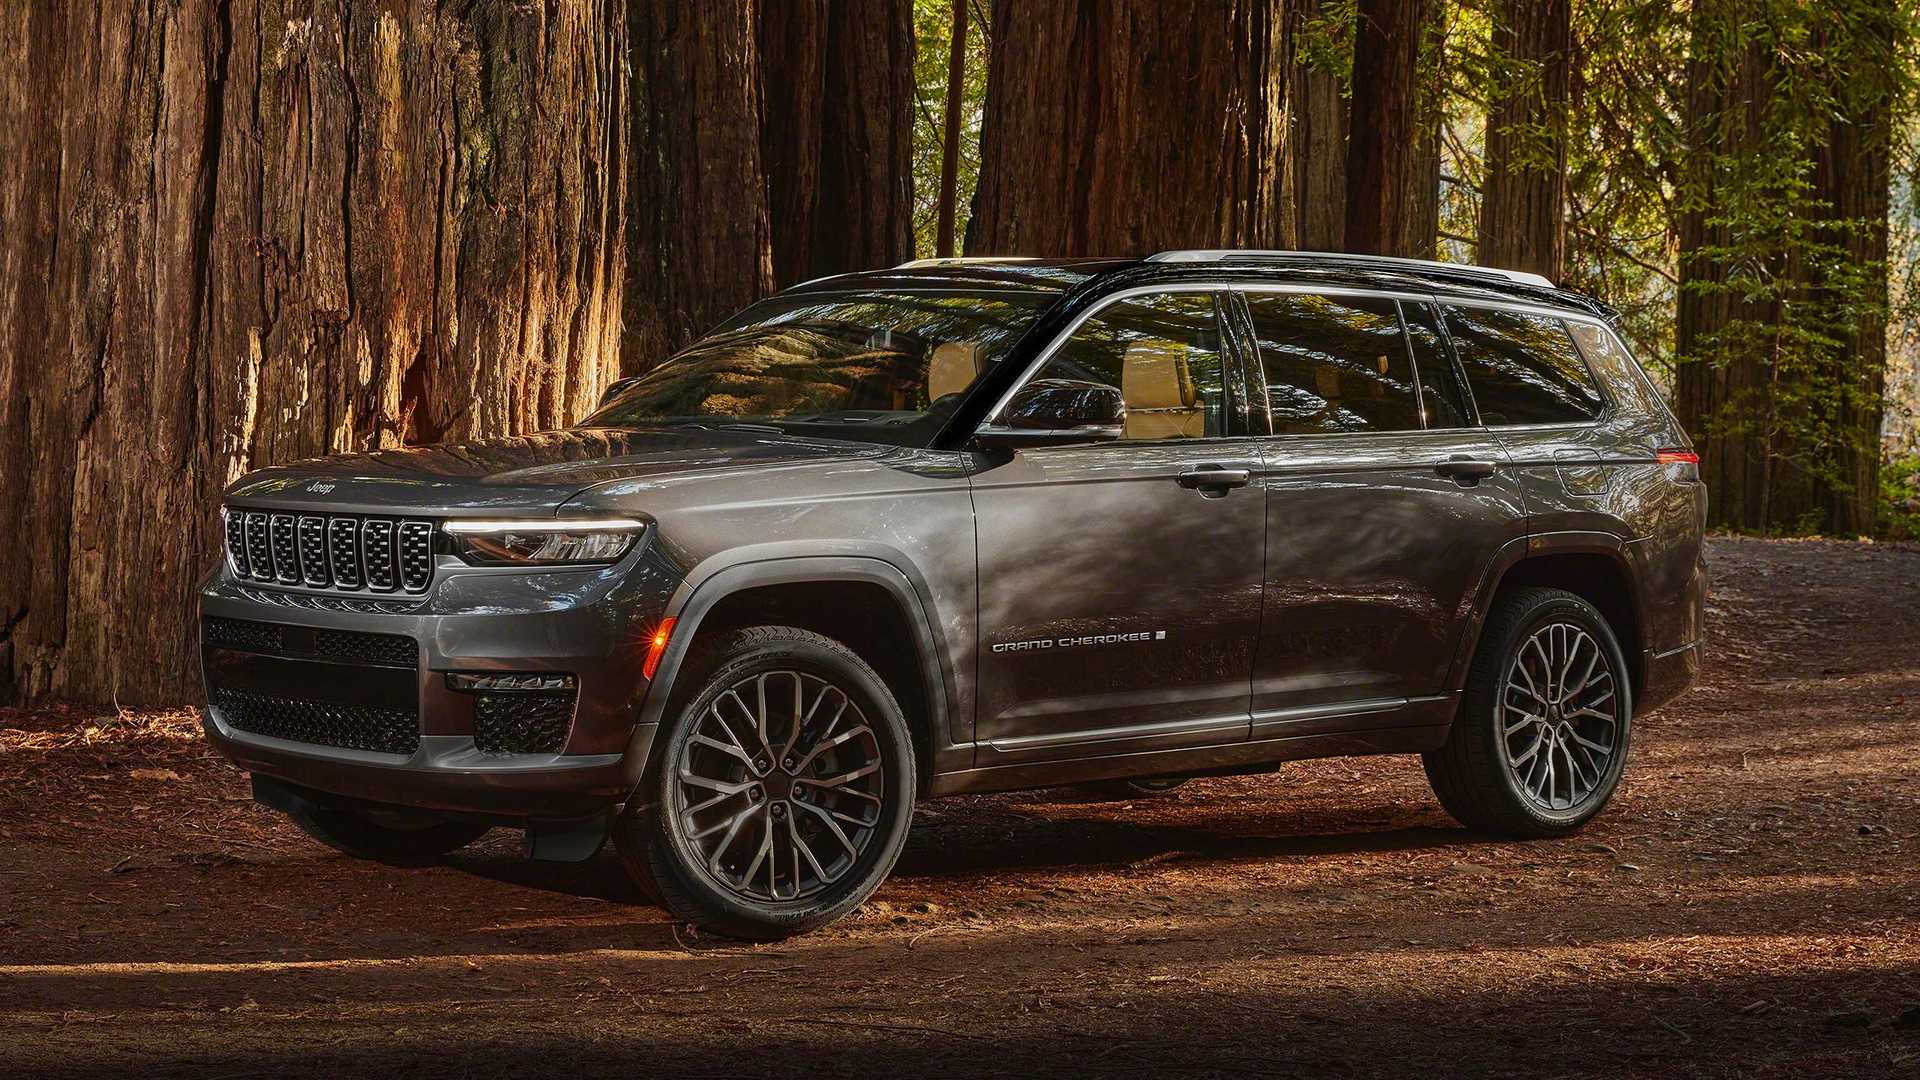 2021 Jeep Grand Cherokee L Has One Unfixable Design